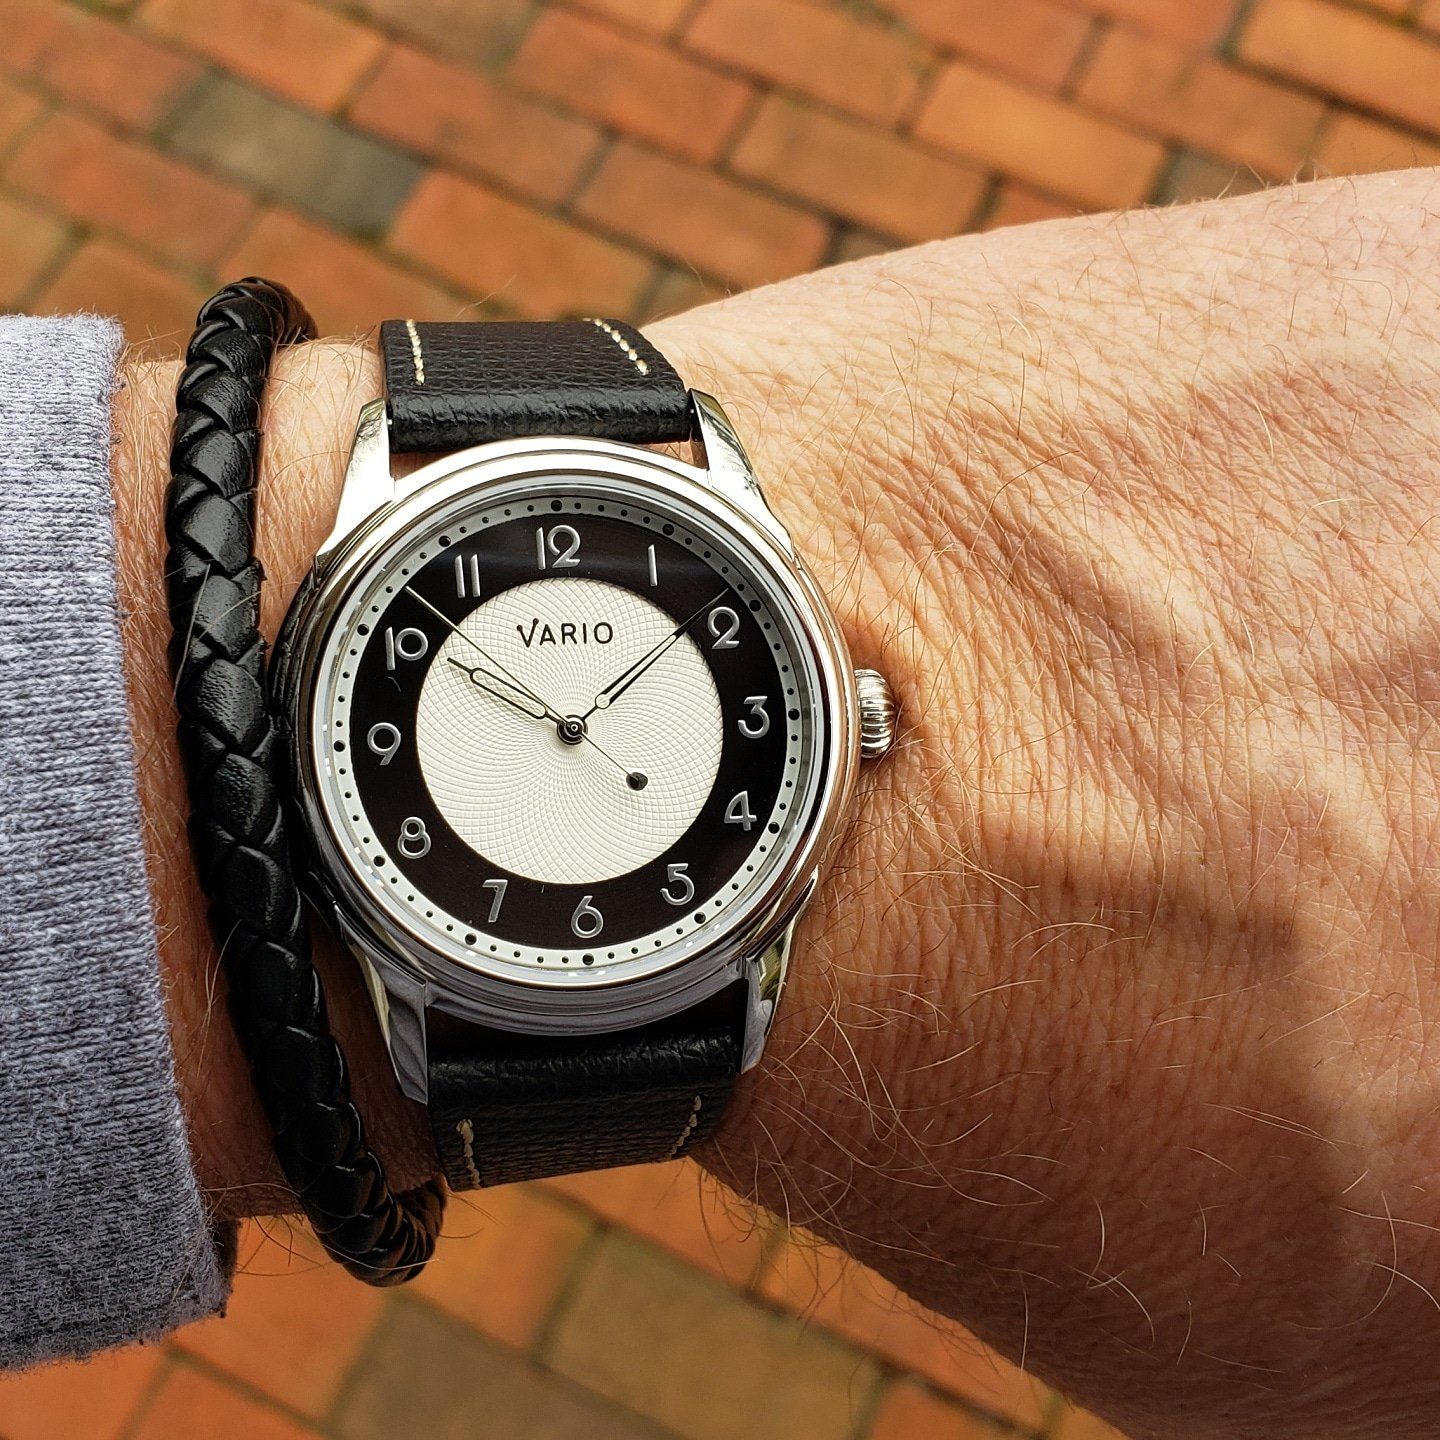 Vario Empire Tuxedo White with vintage style leather strap. Photo by Scott from Watches Galore.